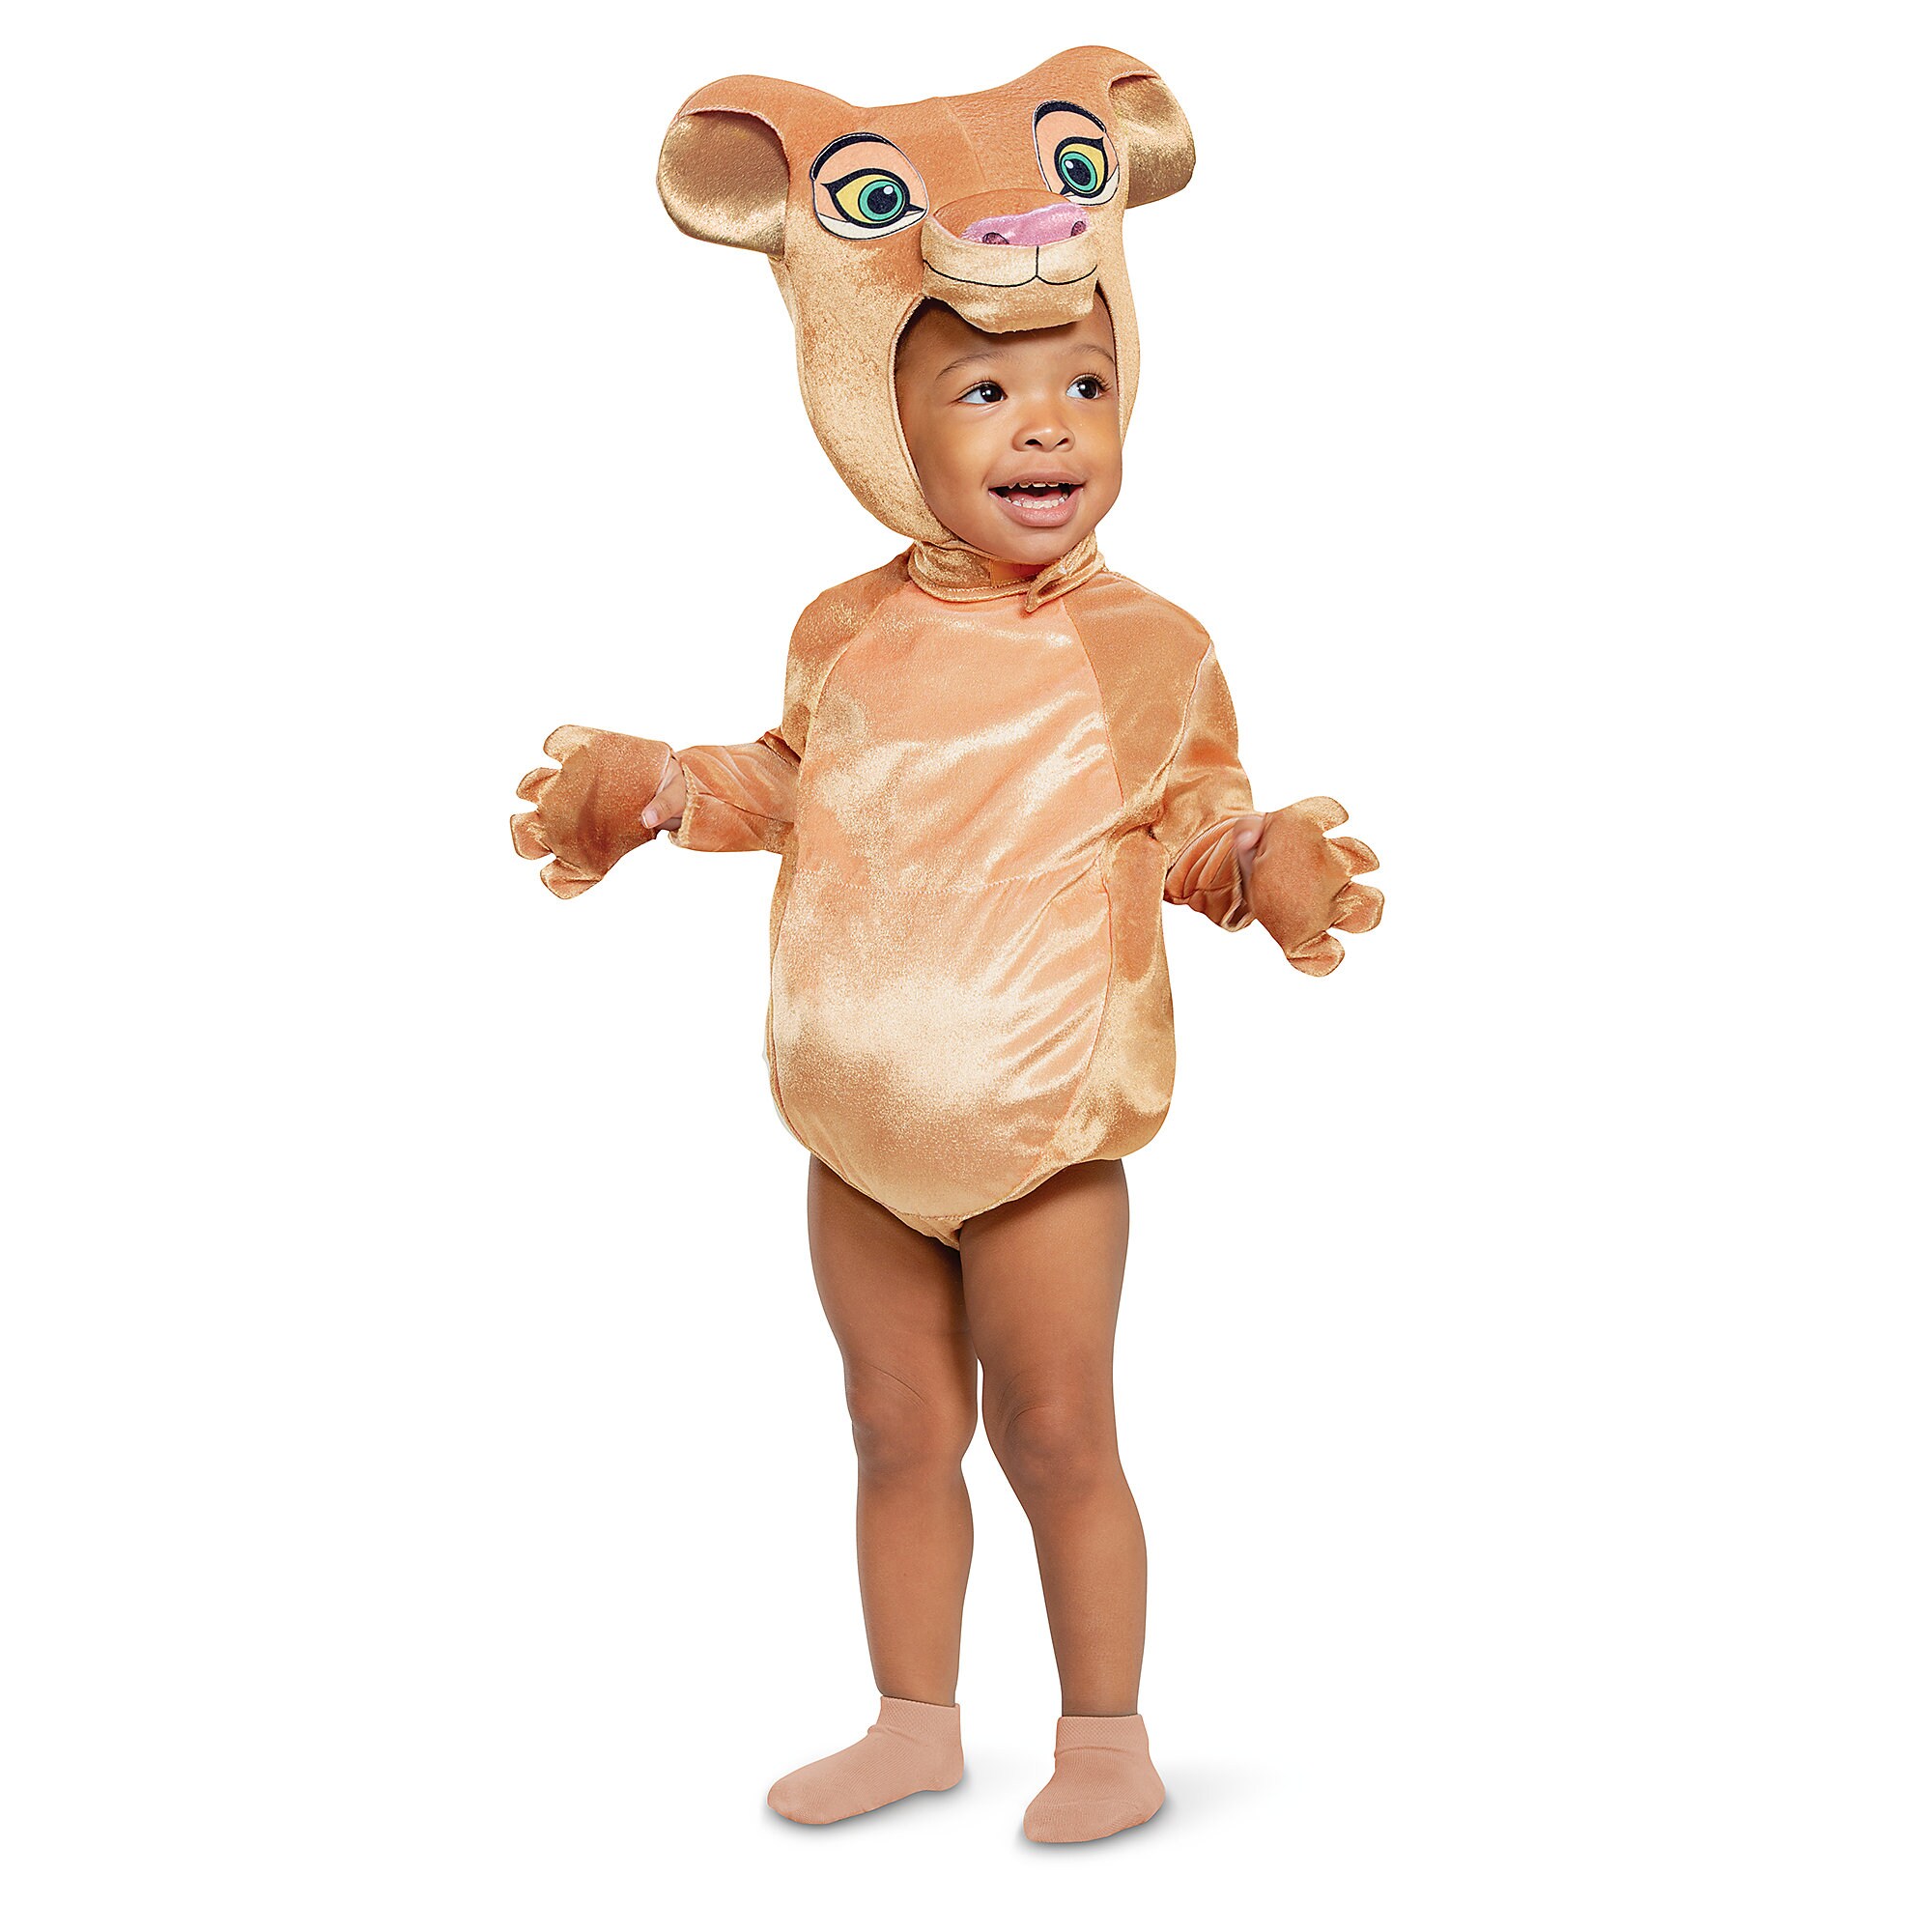 Nala Costume for Baby by Disguise - The Lion King